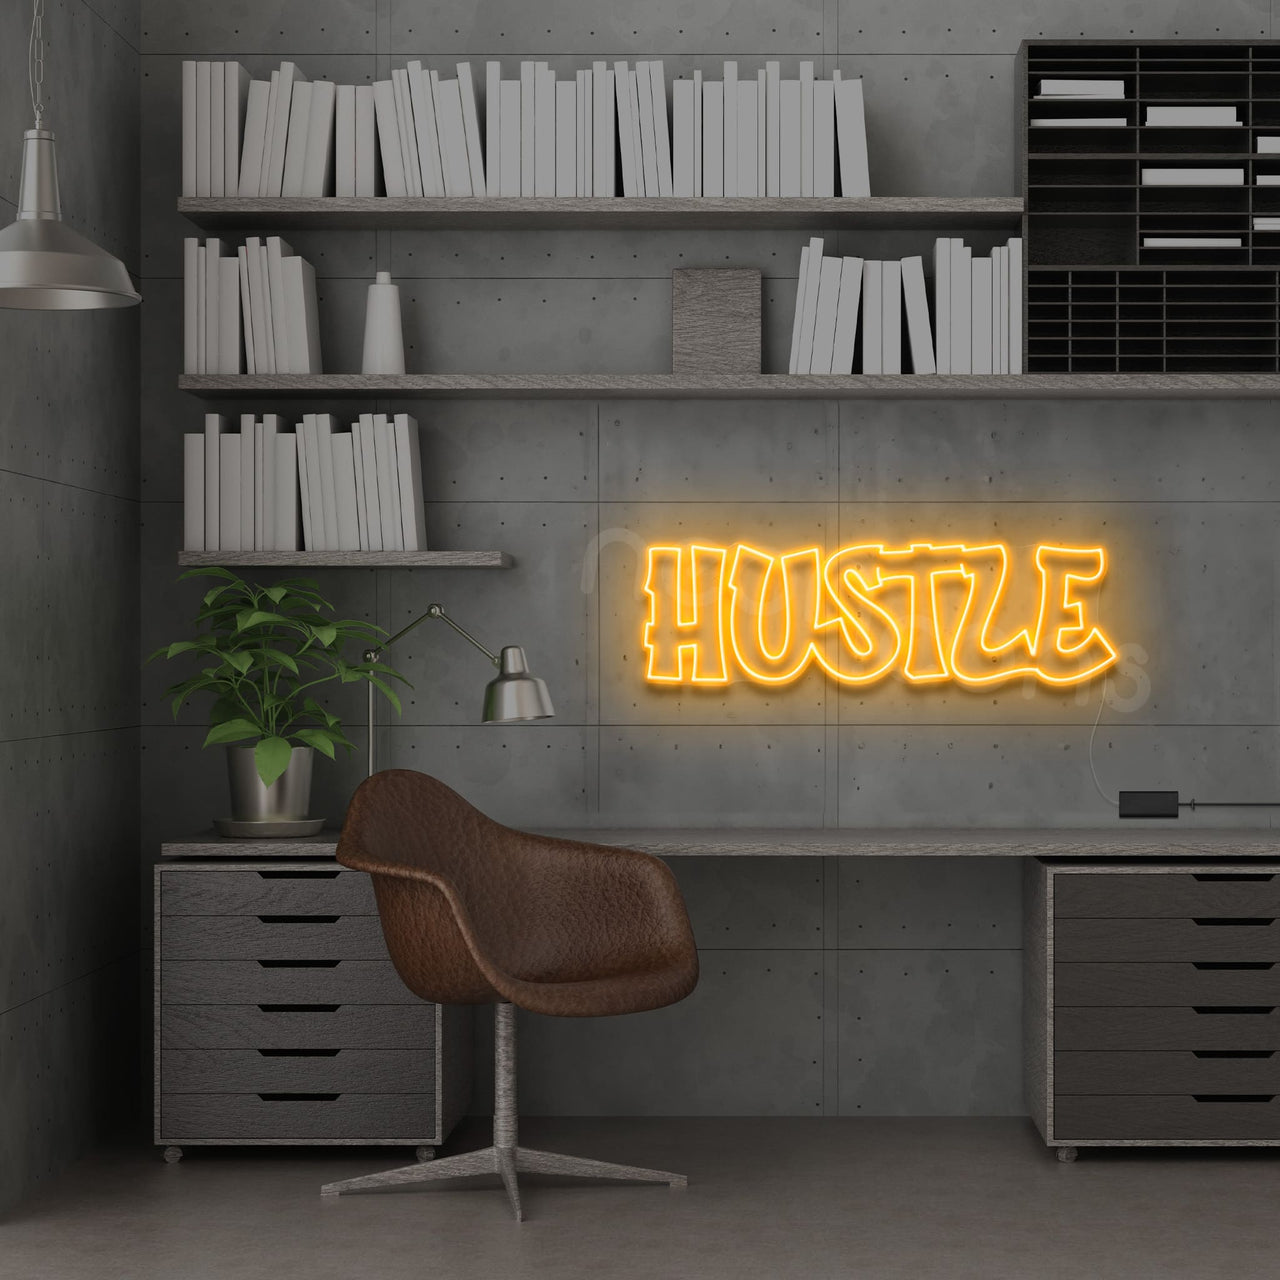 "Hustle" Neon Sign 60cm (2ft) / Orange / LED by Neon Icons